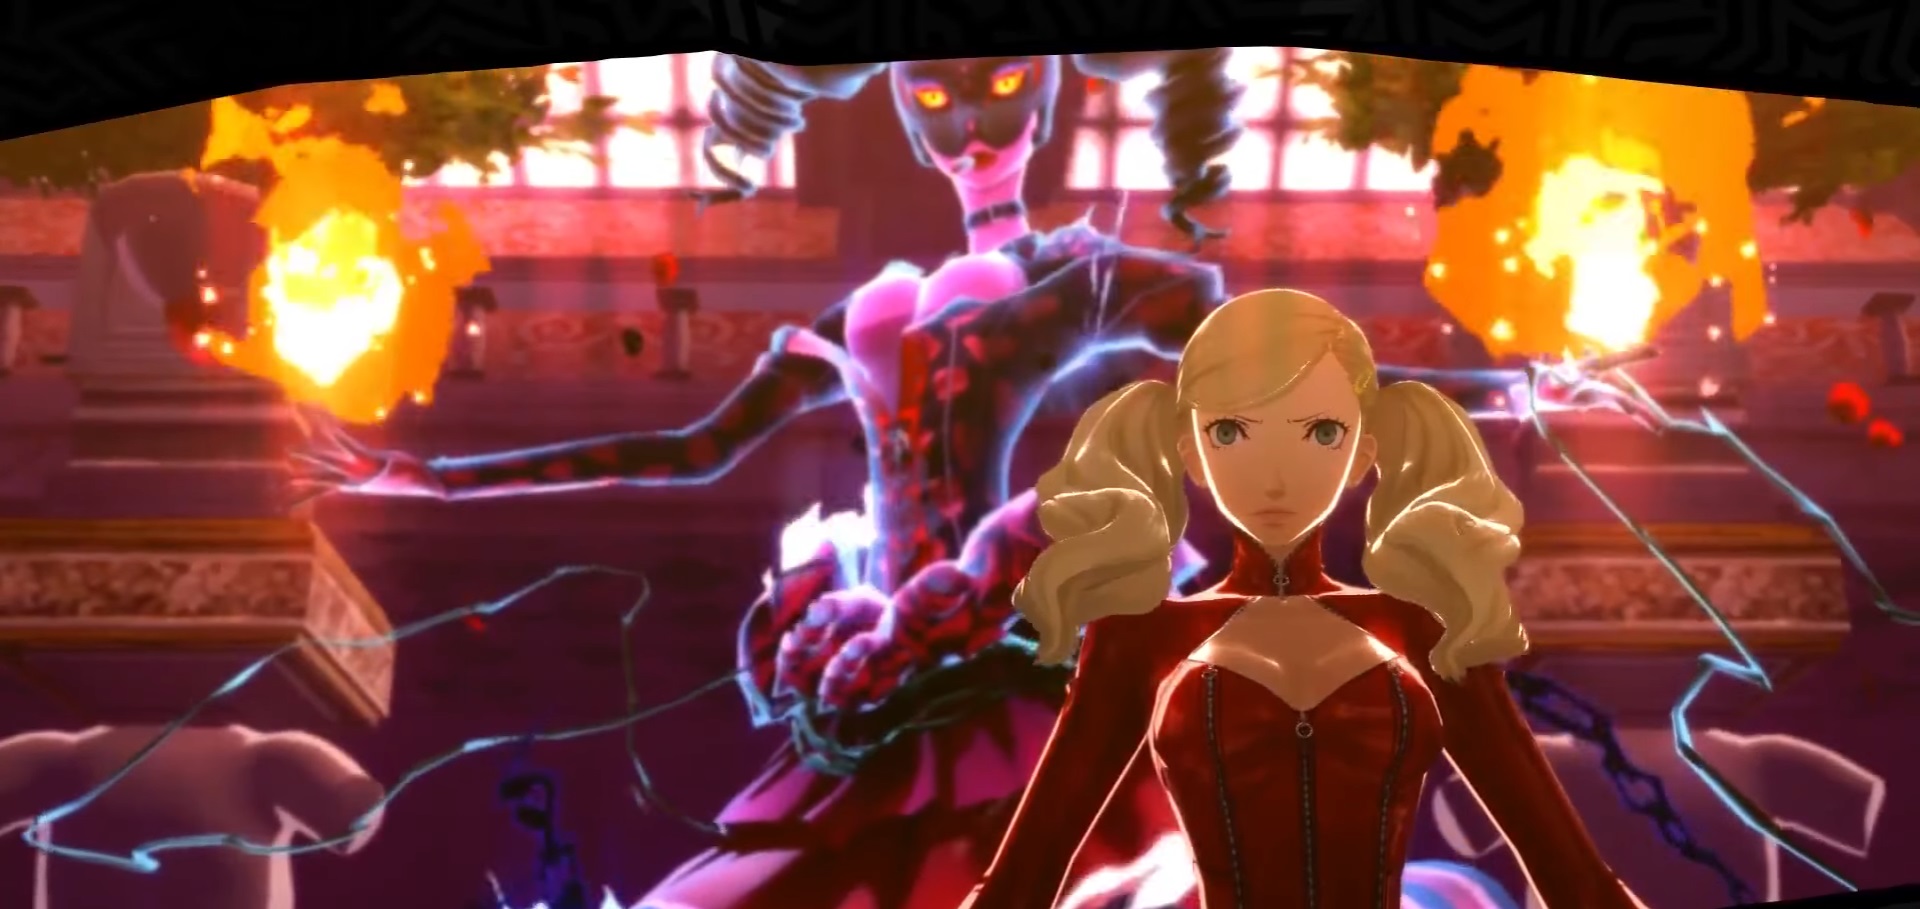 Persona 5 Story Trailer Released! | PSX 2016 Highlight